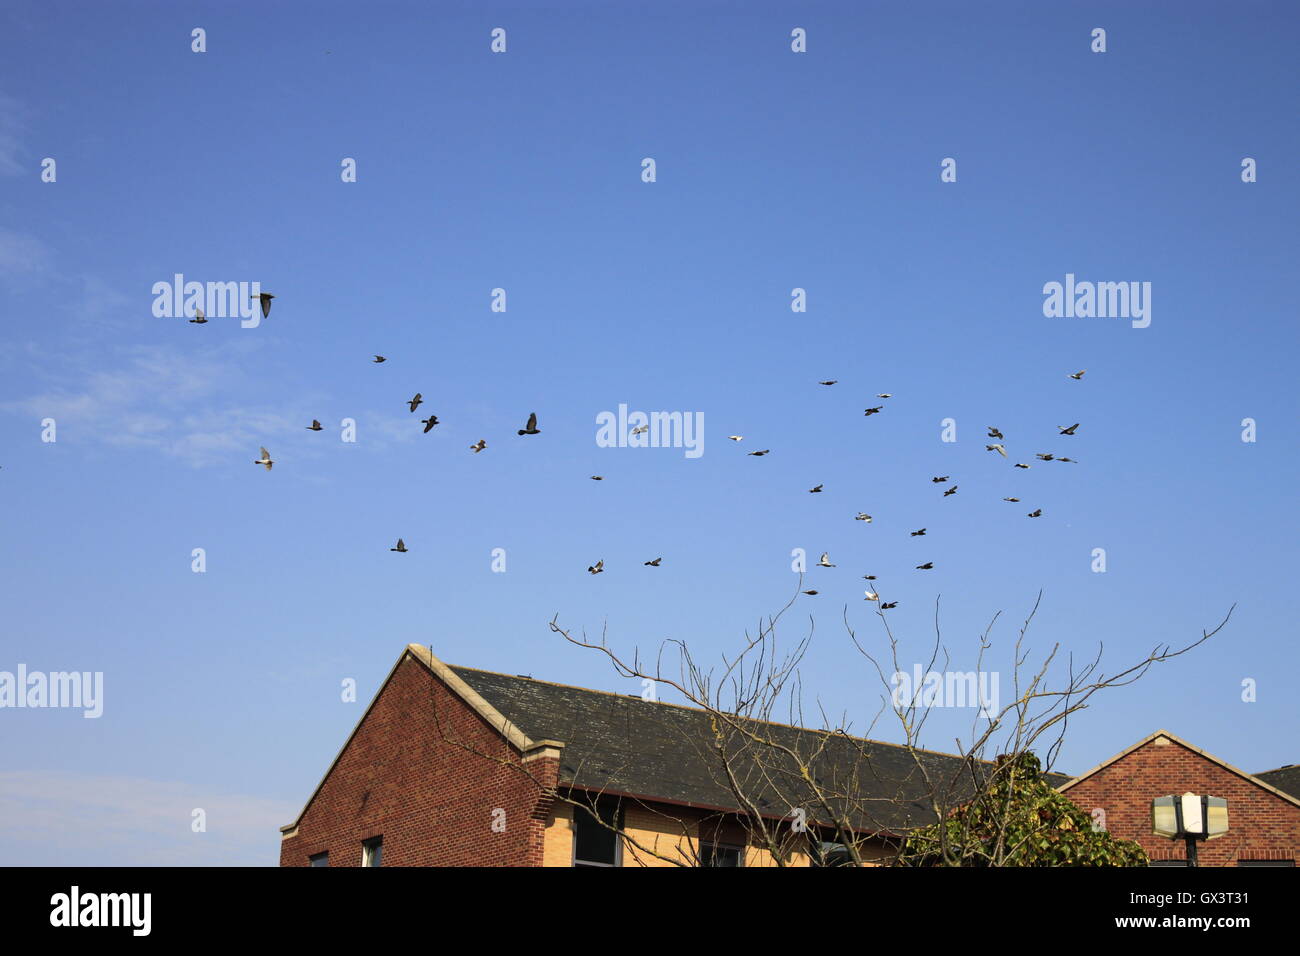 Pigeons circling and landing on modern office building against a blue sky. Stock Photo